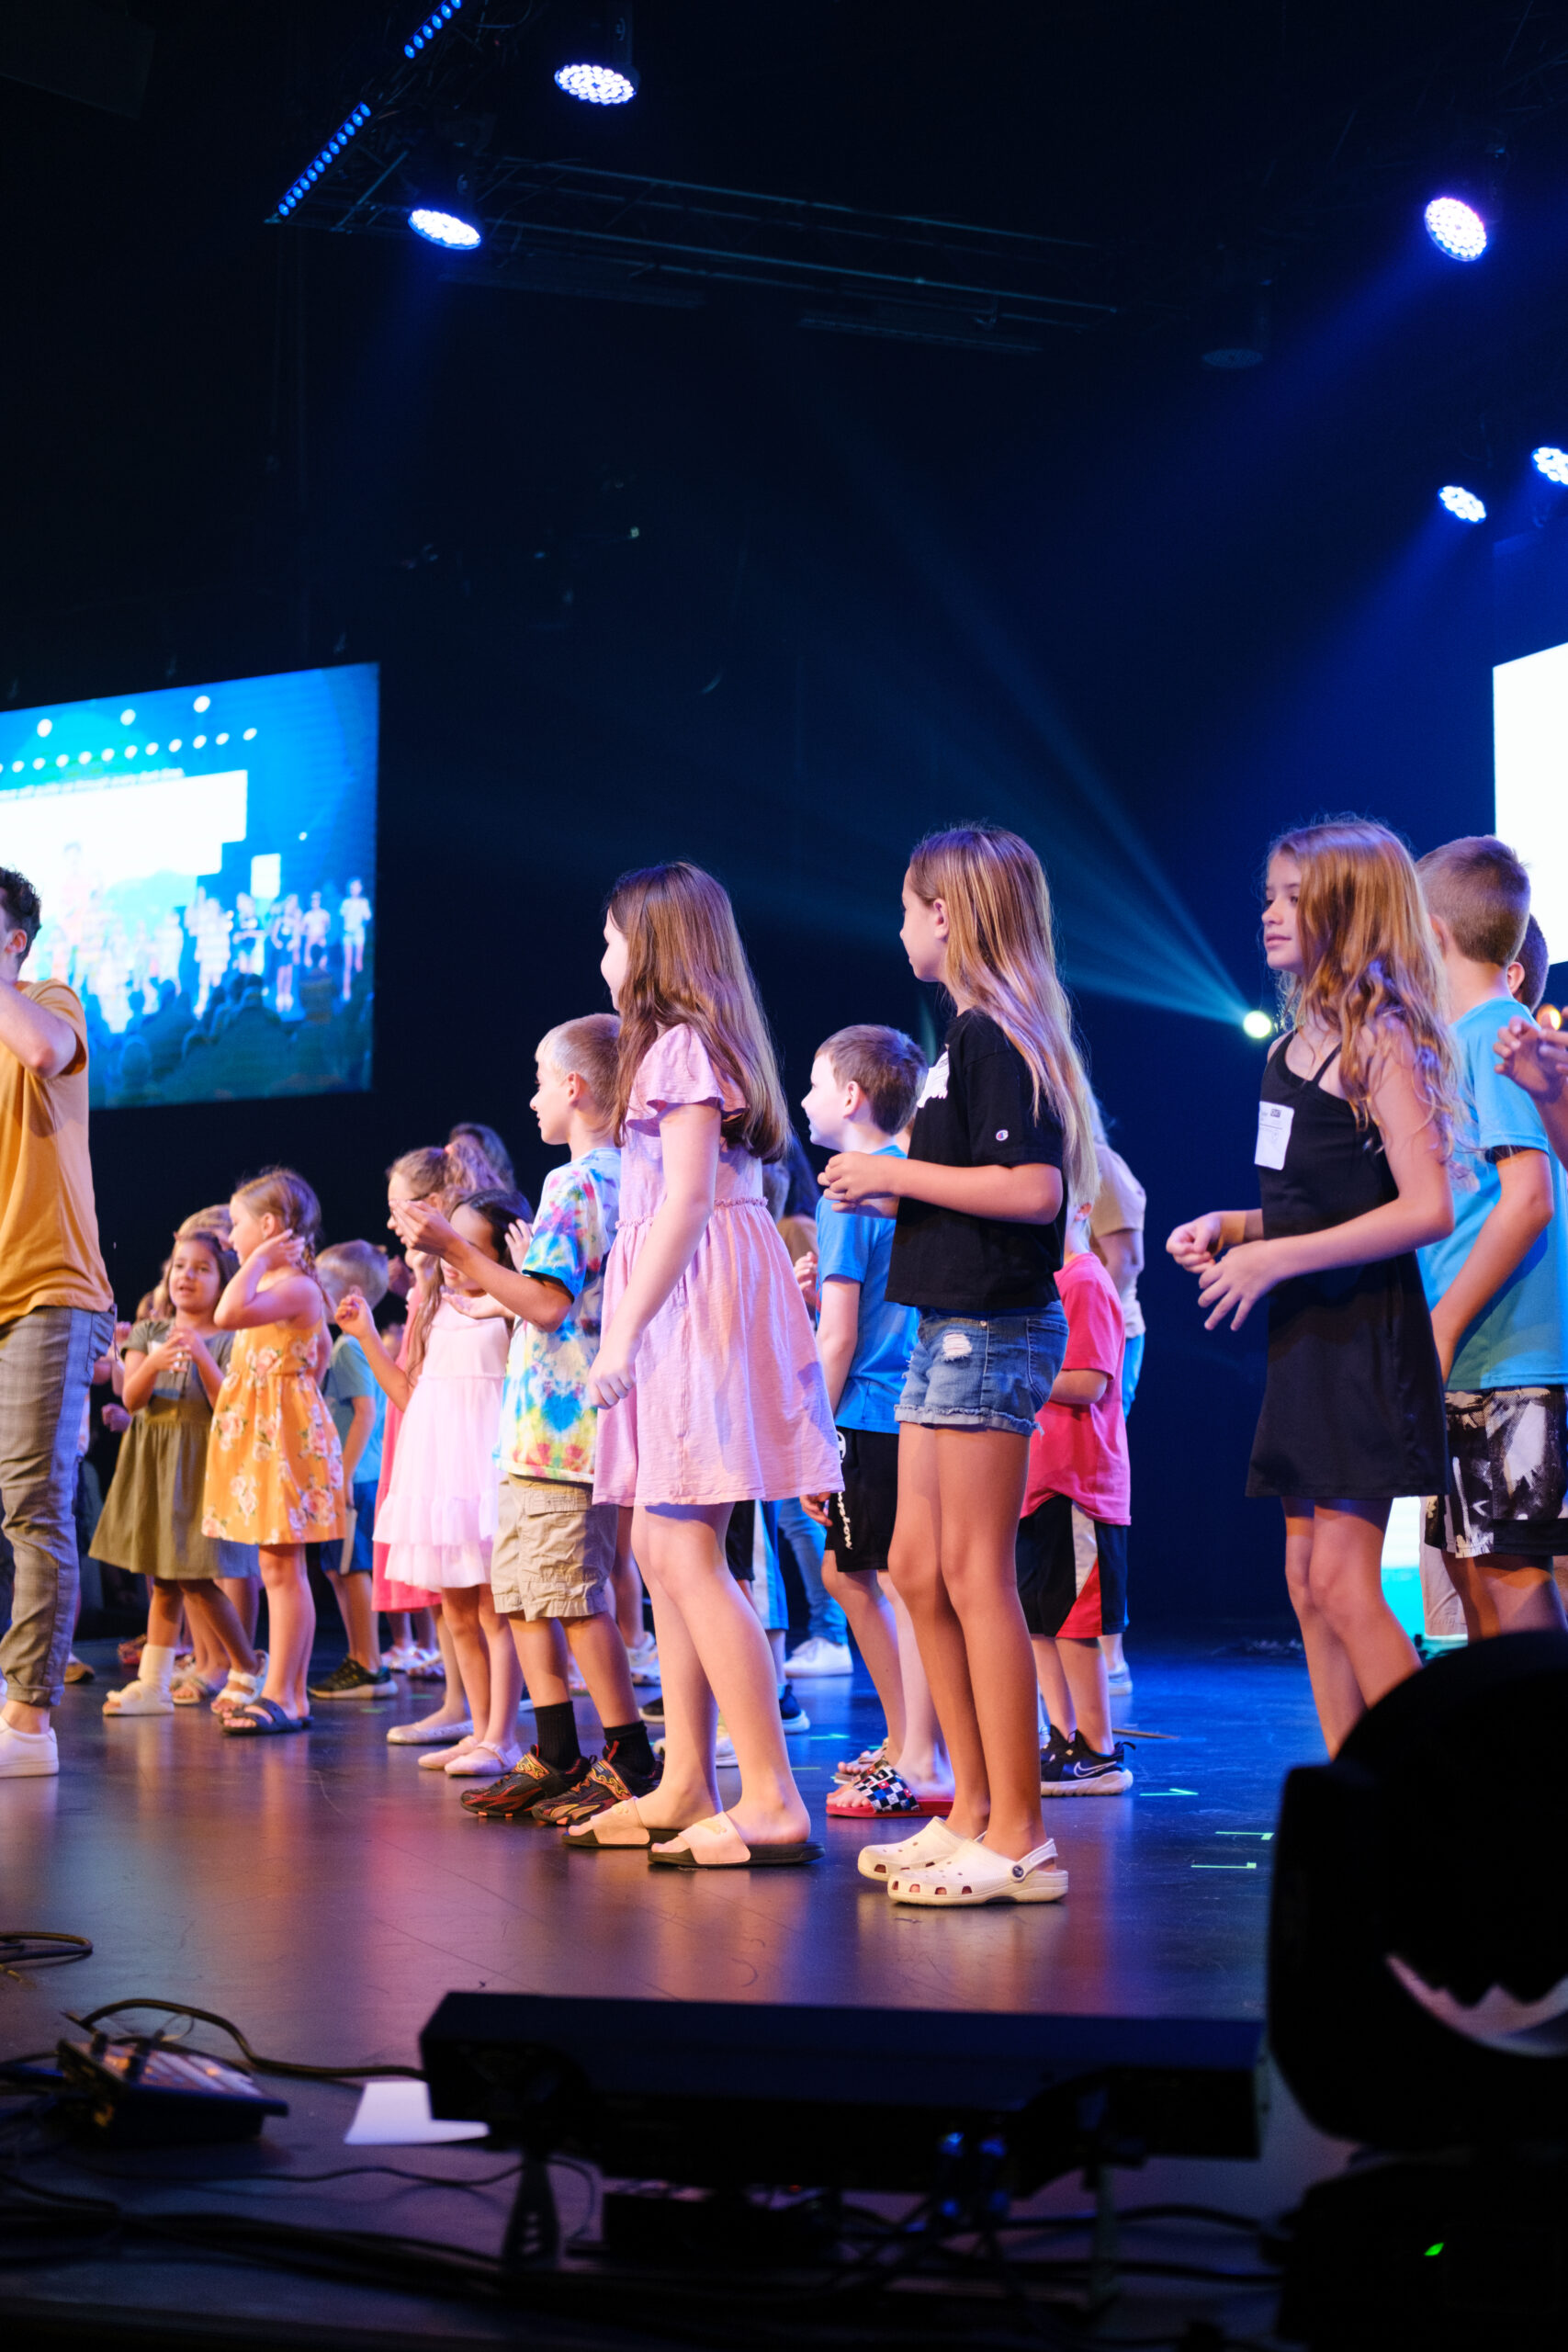 Image of kids ministry performing on stage at church.